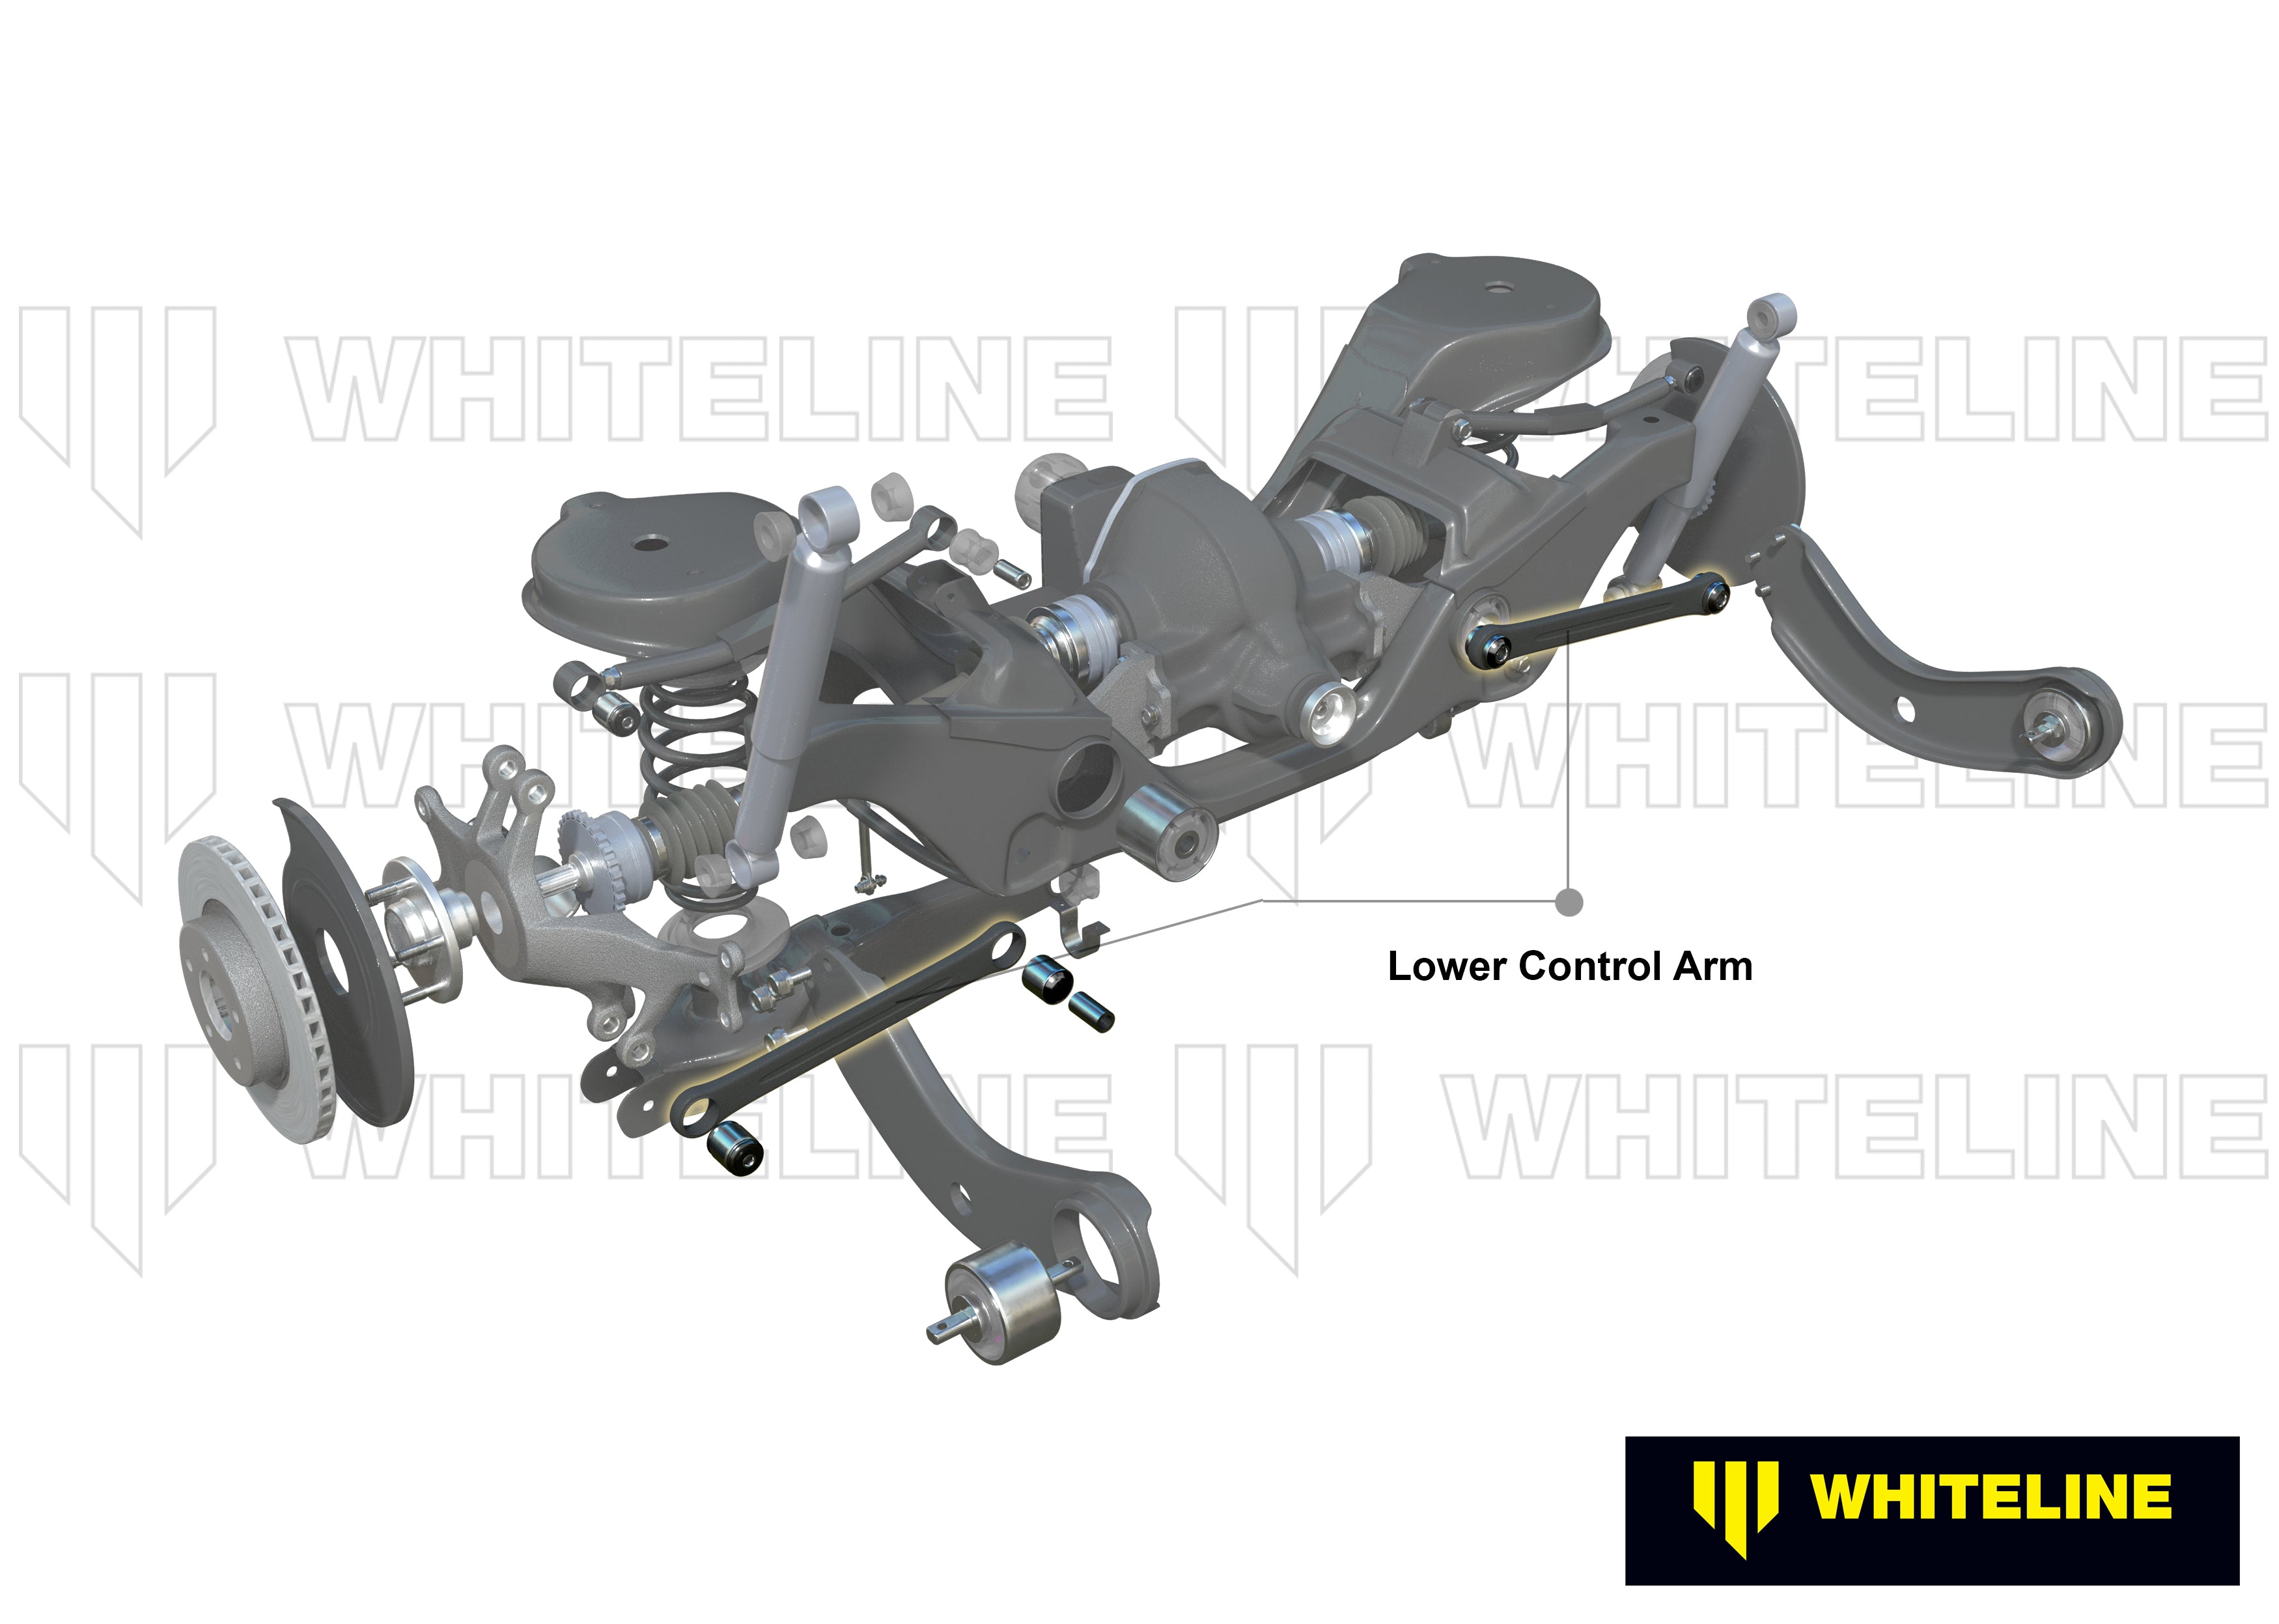 Rear Control Arm Lower Front - Arm to Suit Ford Focus, Mazda3 and Volvo C30, S40 (WA401)